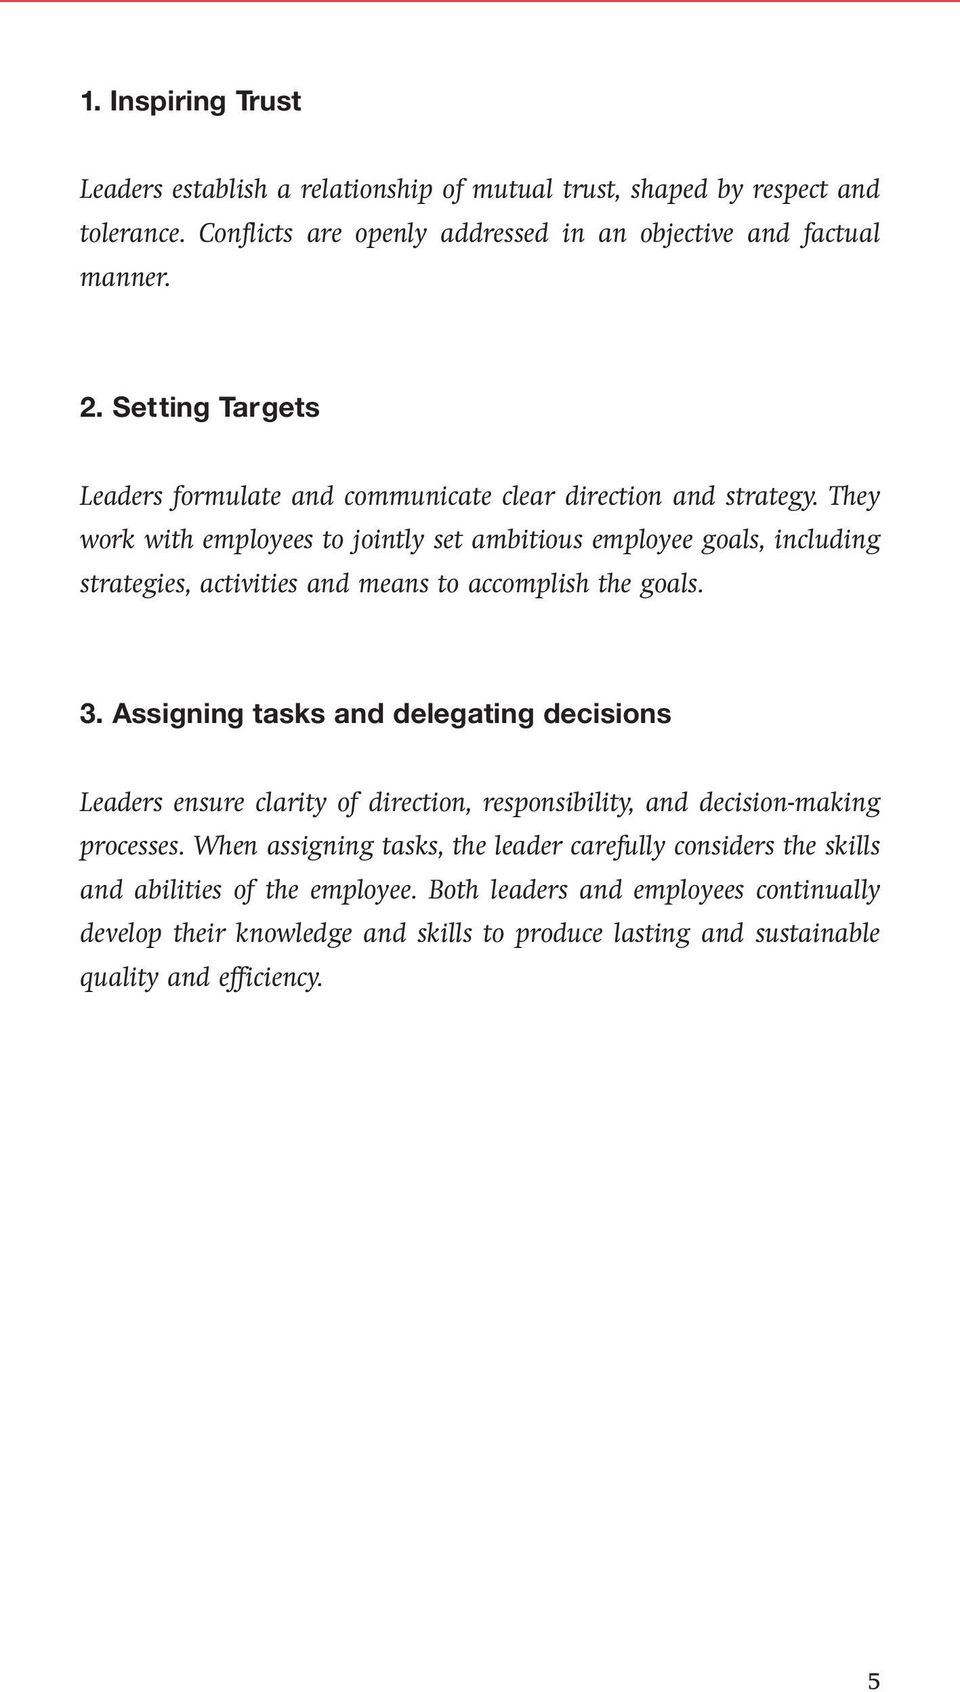 They work with employees to jointly set ambitious employee goals, including strategies, activities and means to accomplish the goals. 3.